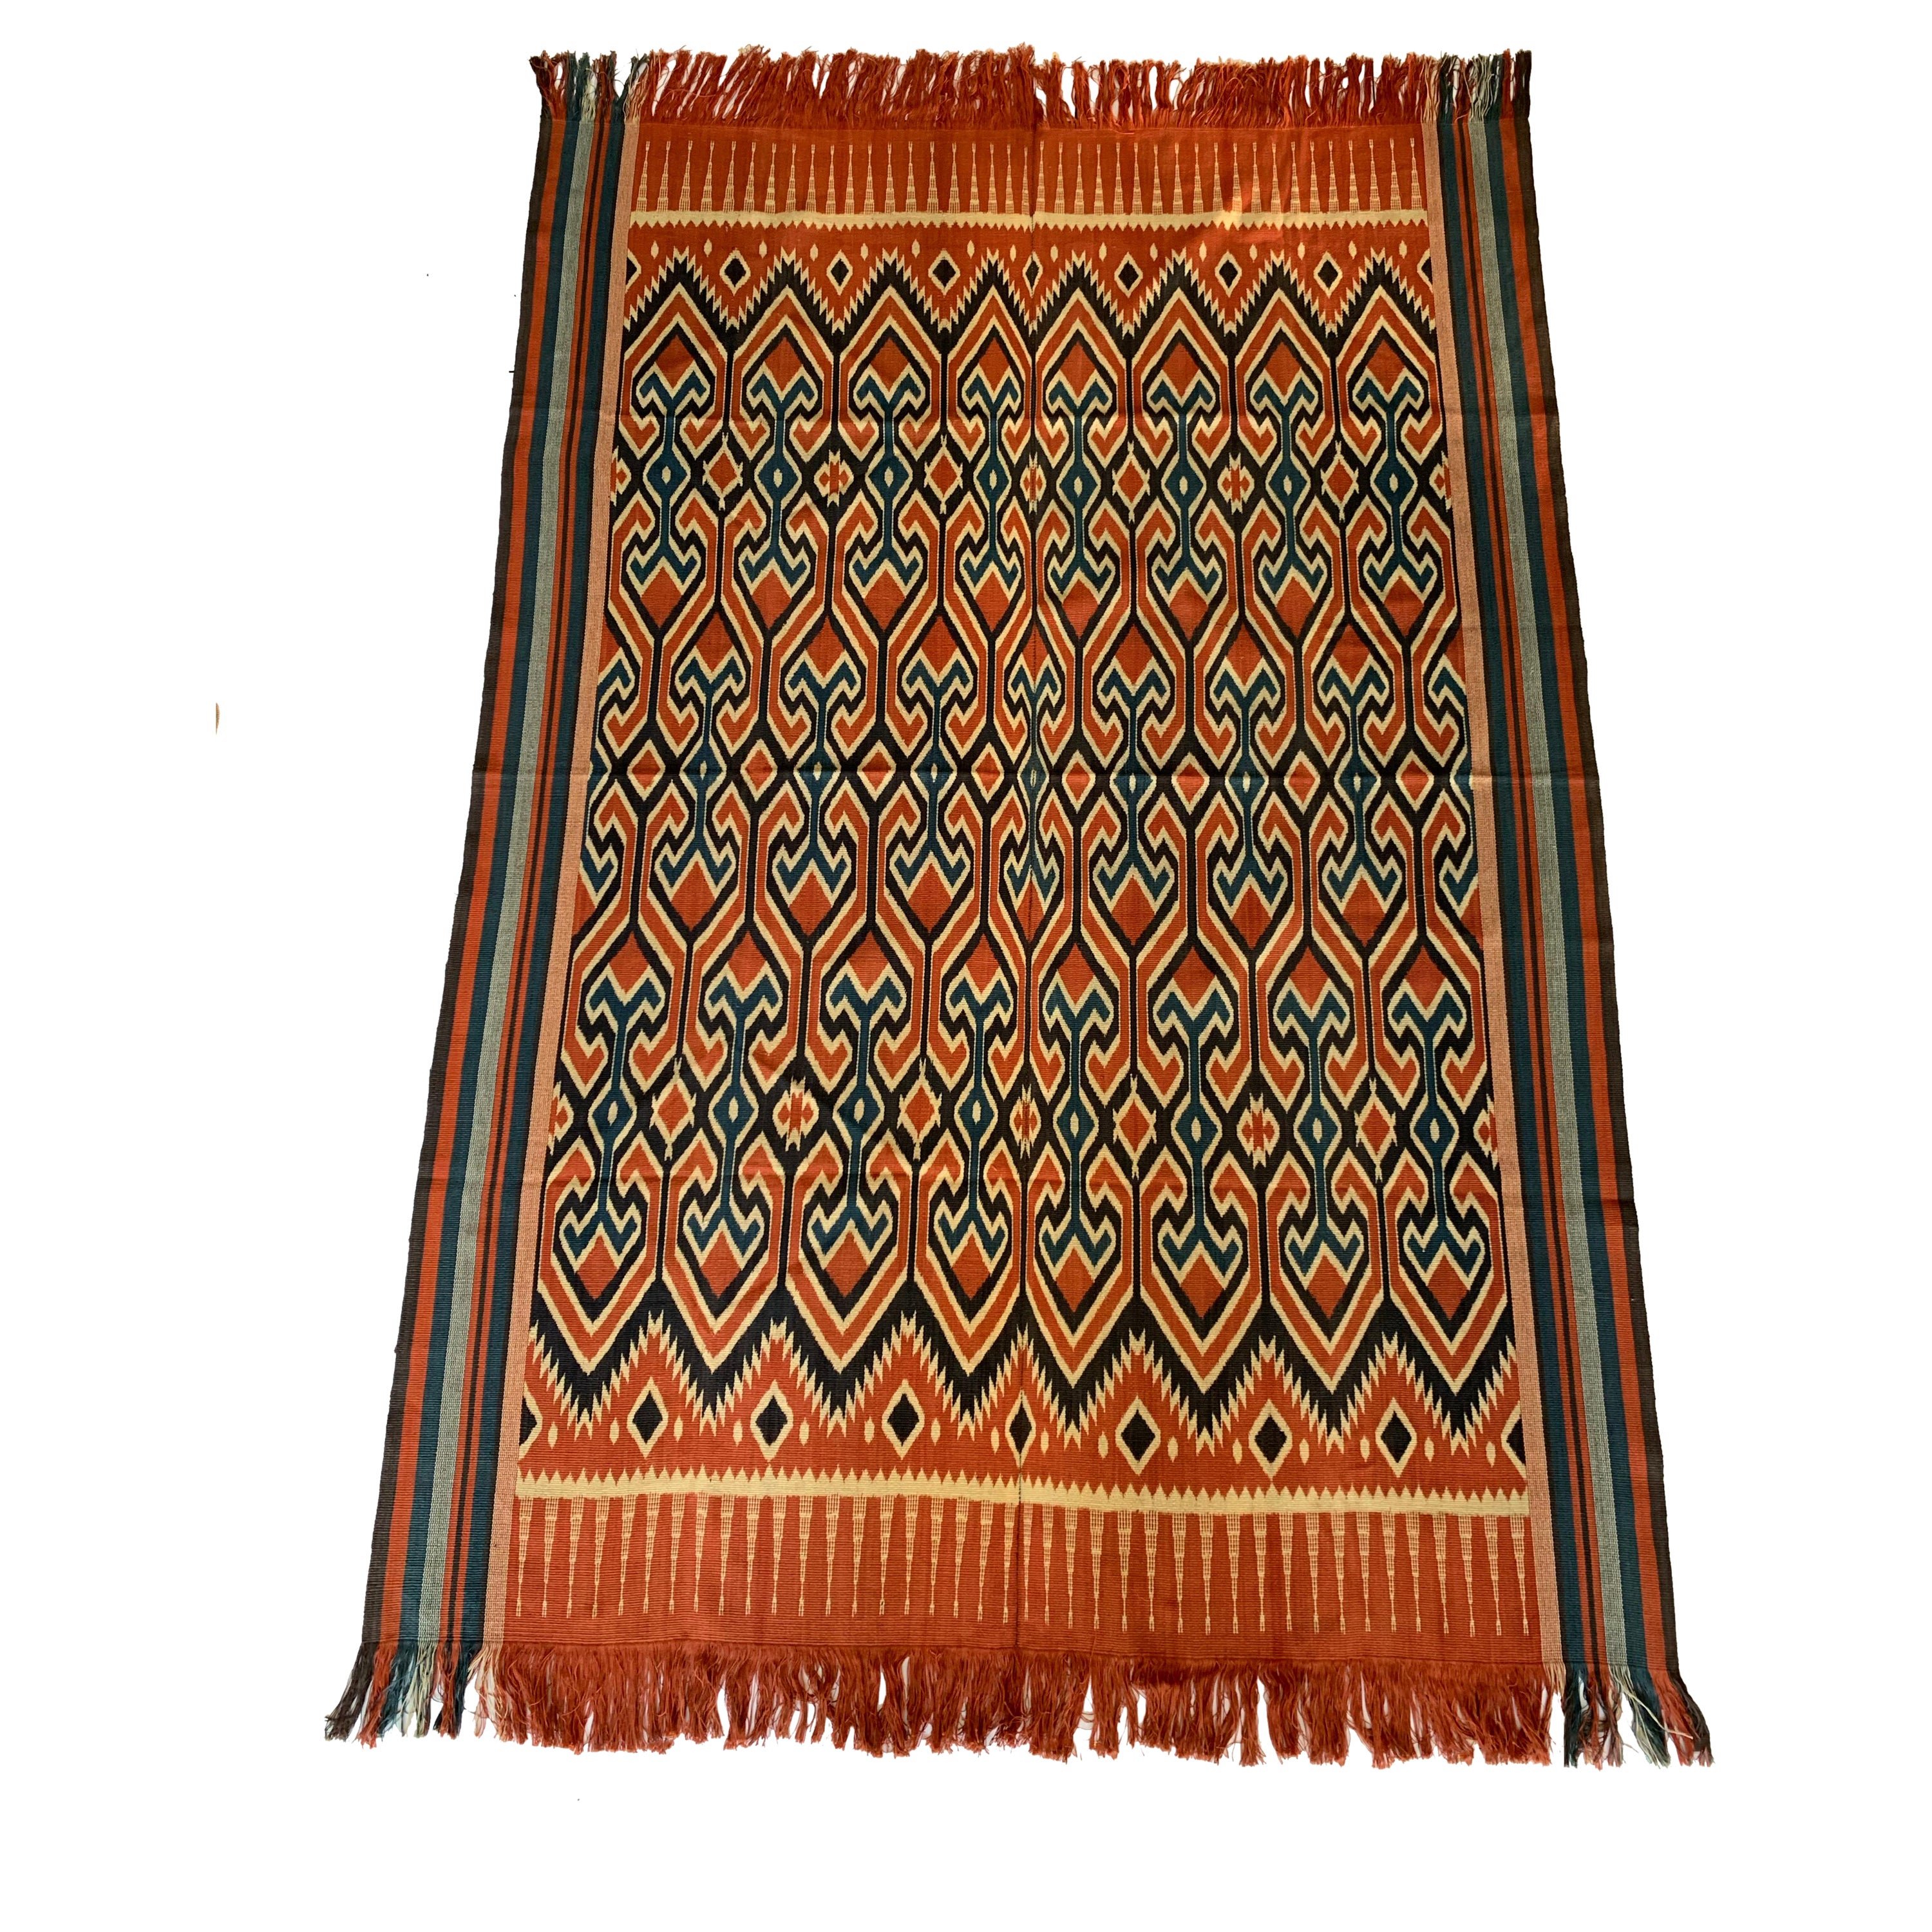 Ikat Textile from Toraja Tribe of Sulawesi with Stunning Tribal Motifs